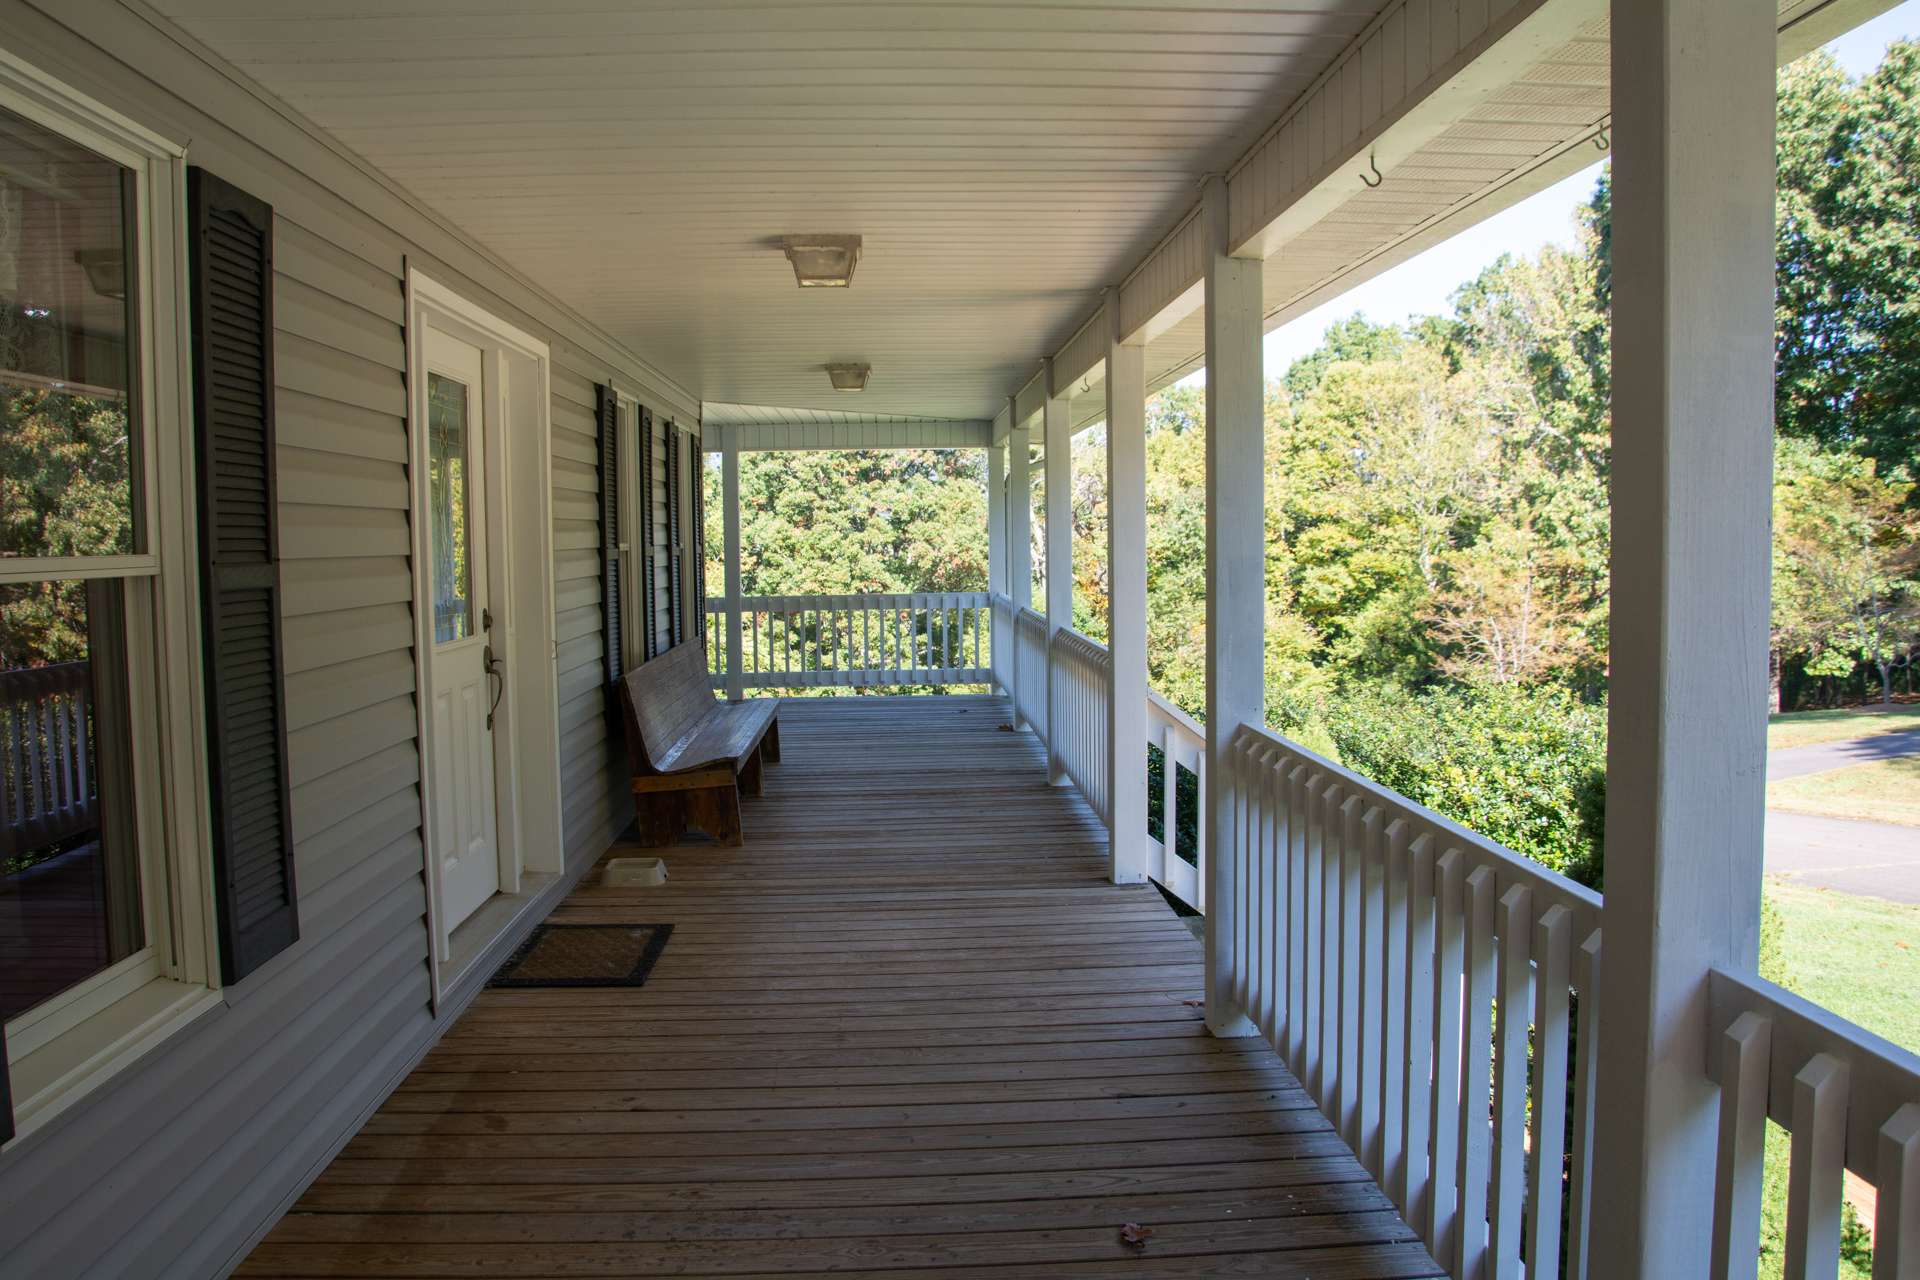 Covered porch on front of house welcomes neighbors and friends and provides shade on sunny afternoons.